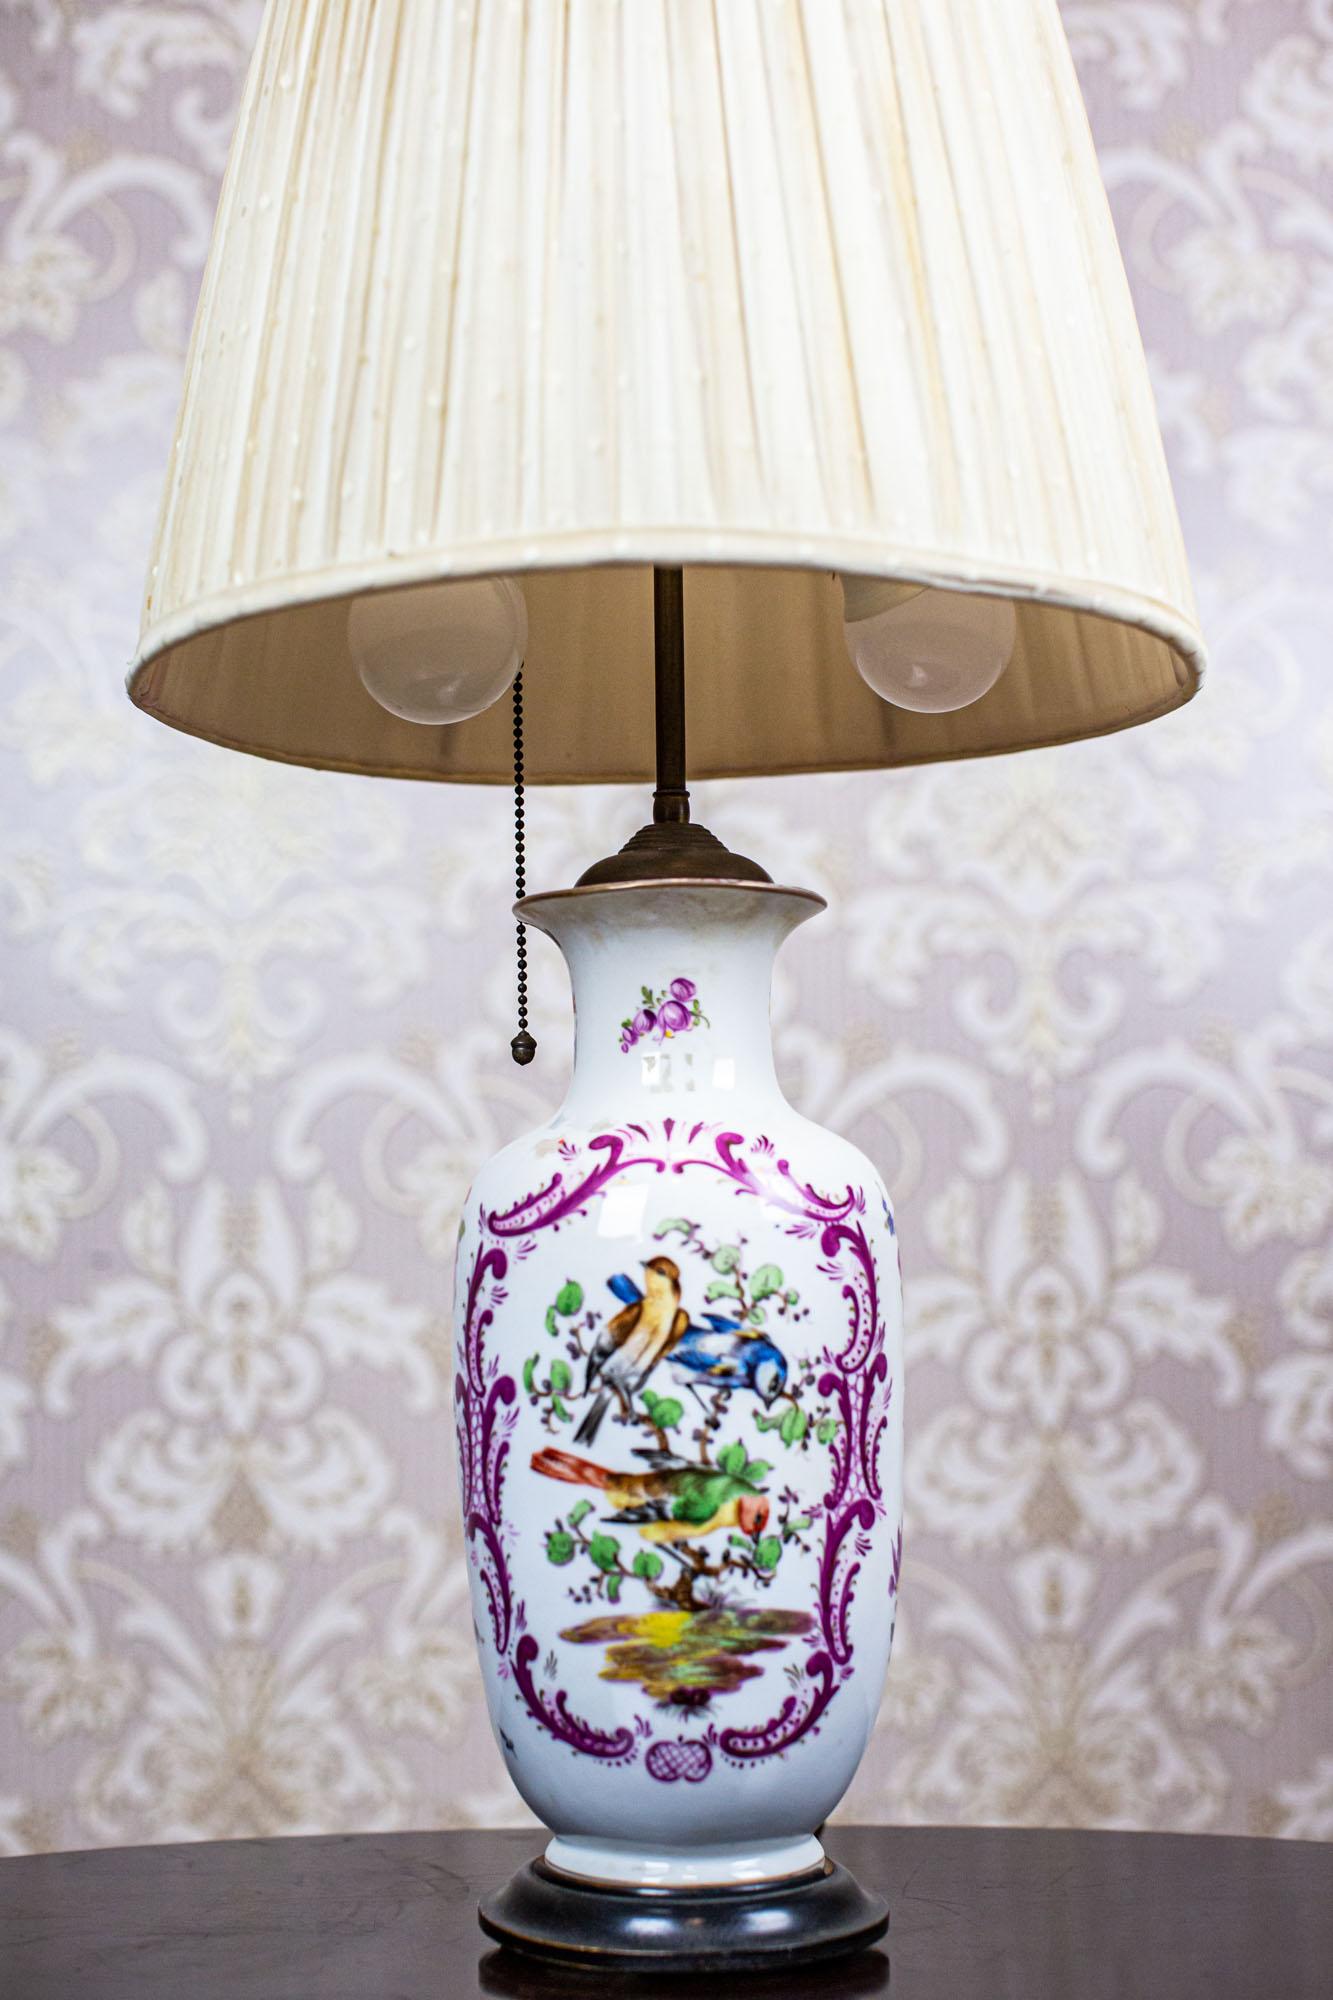 European 20th-Century Electric Table Lamp with Decorative Ceramic Base For Sale